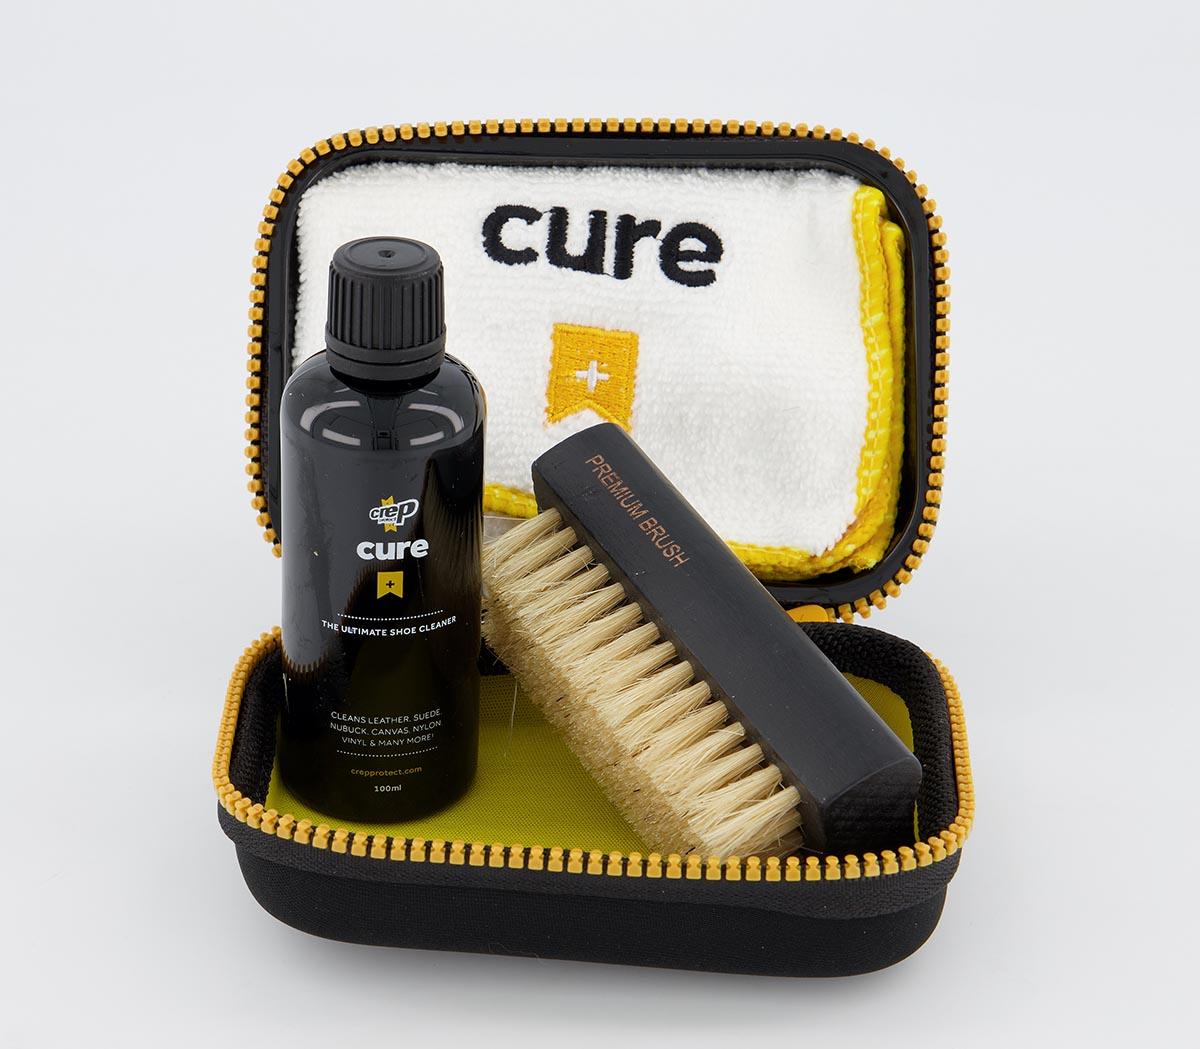 Crep ProtectCrep Protect Cure Travel KitCure